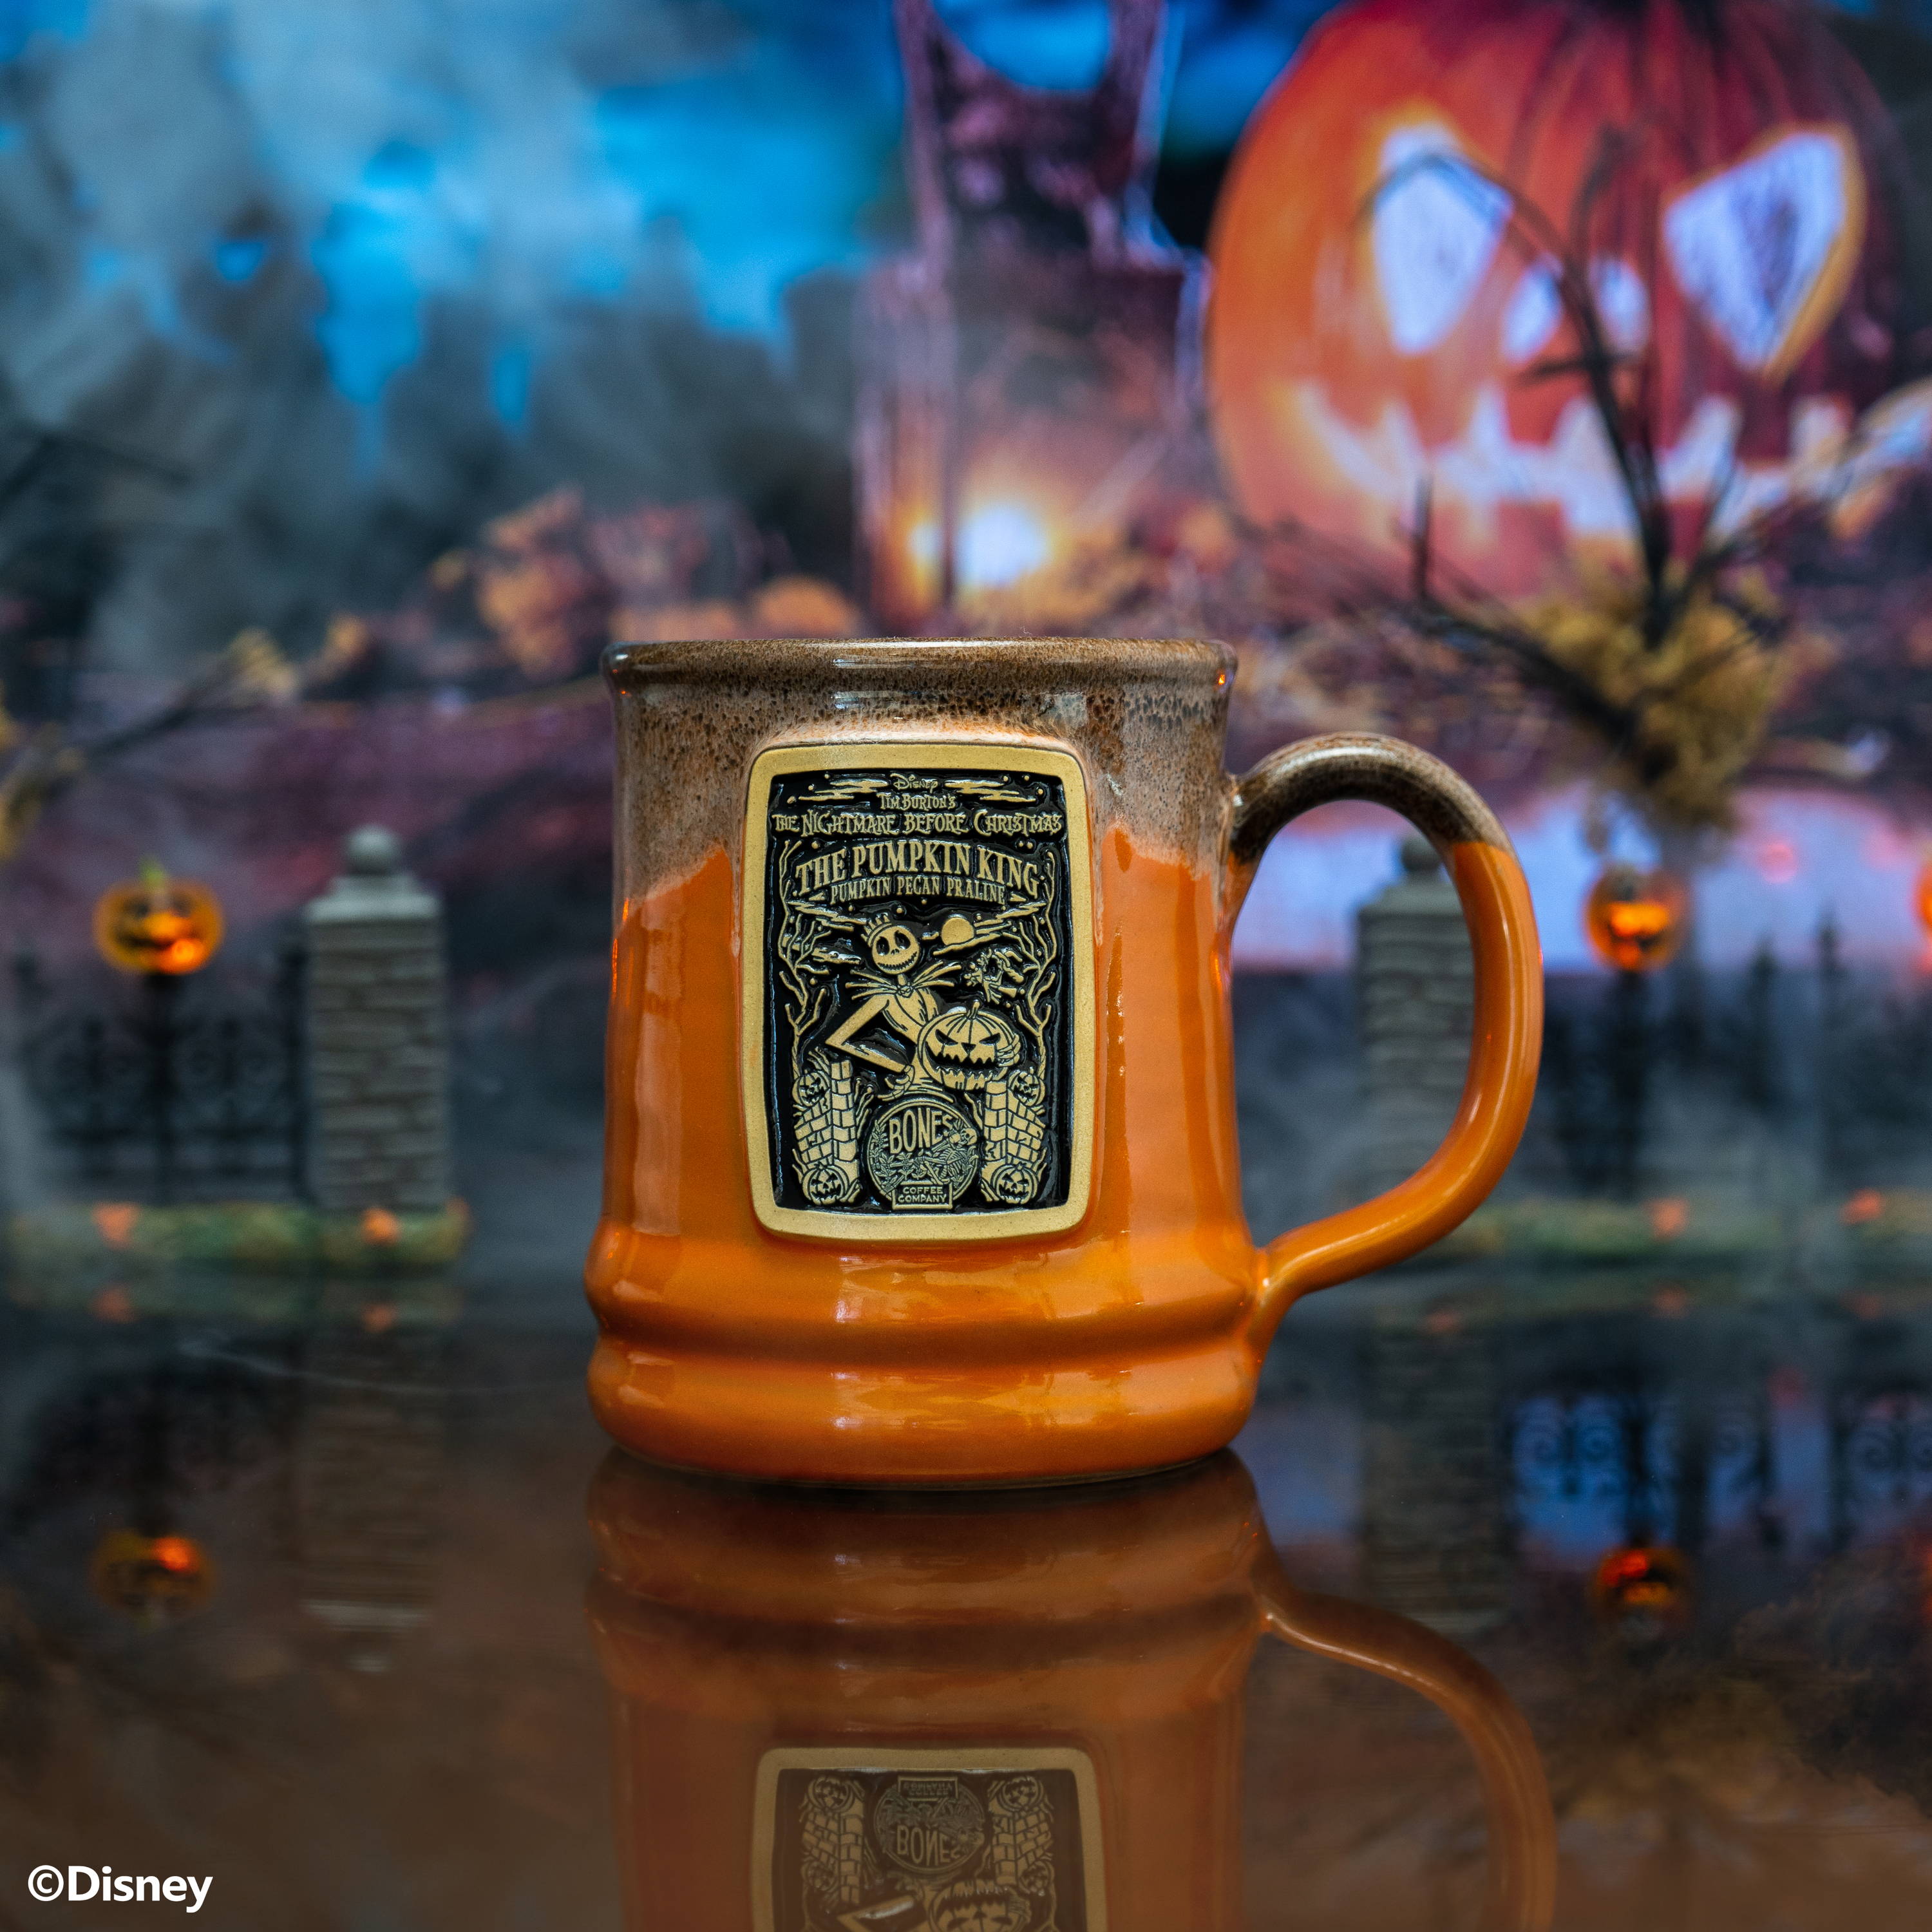 The front of the Bones Coffee Company The Pumpkin King hand thrown mug with Jack Skellington on the golden medallion. The mug is orange colored with a black and white glaze on top. It is inside a toy graveyard.